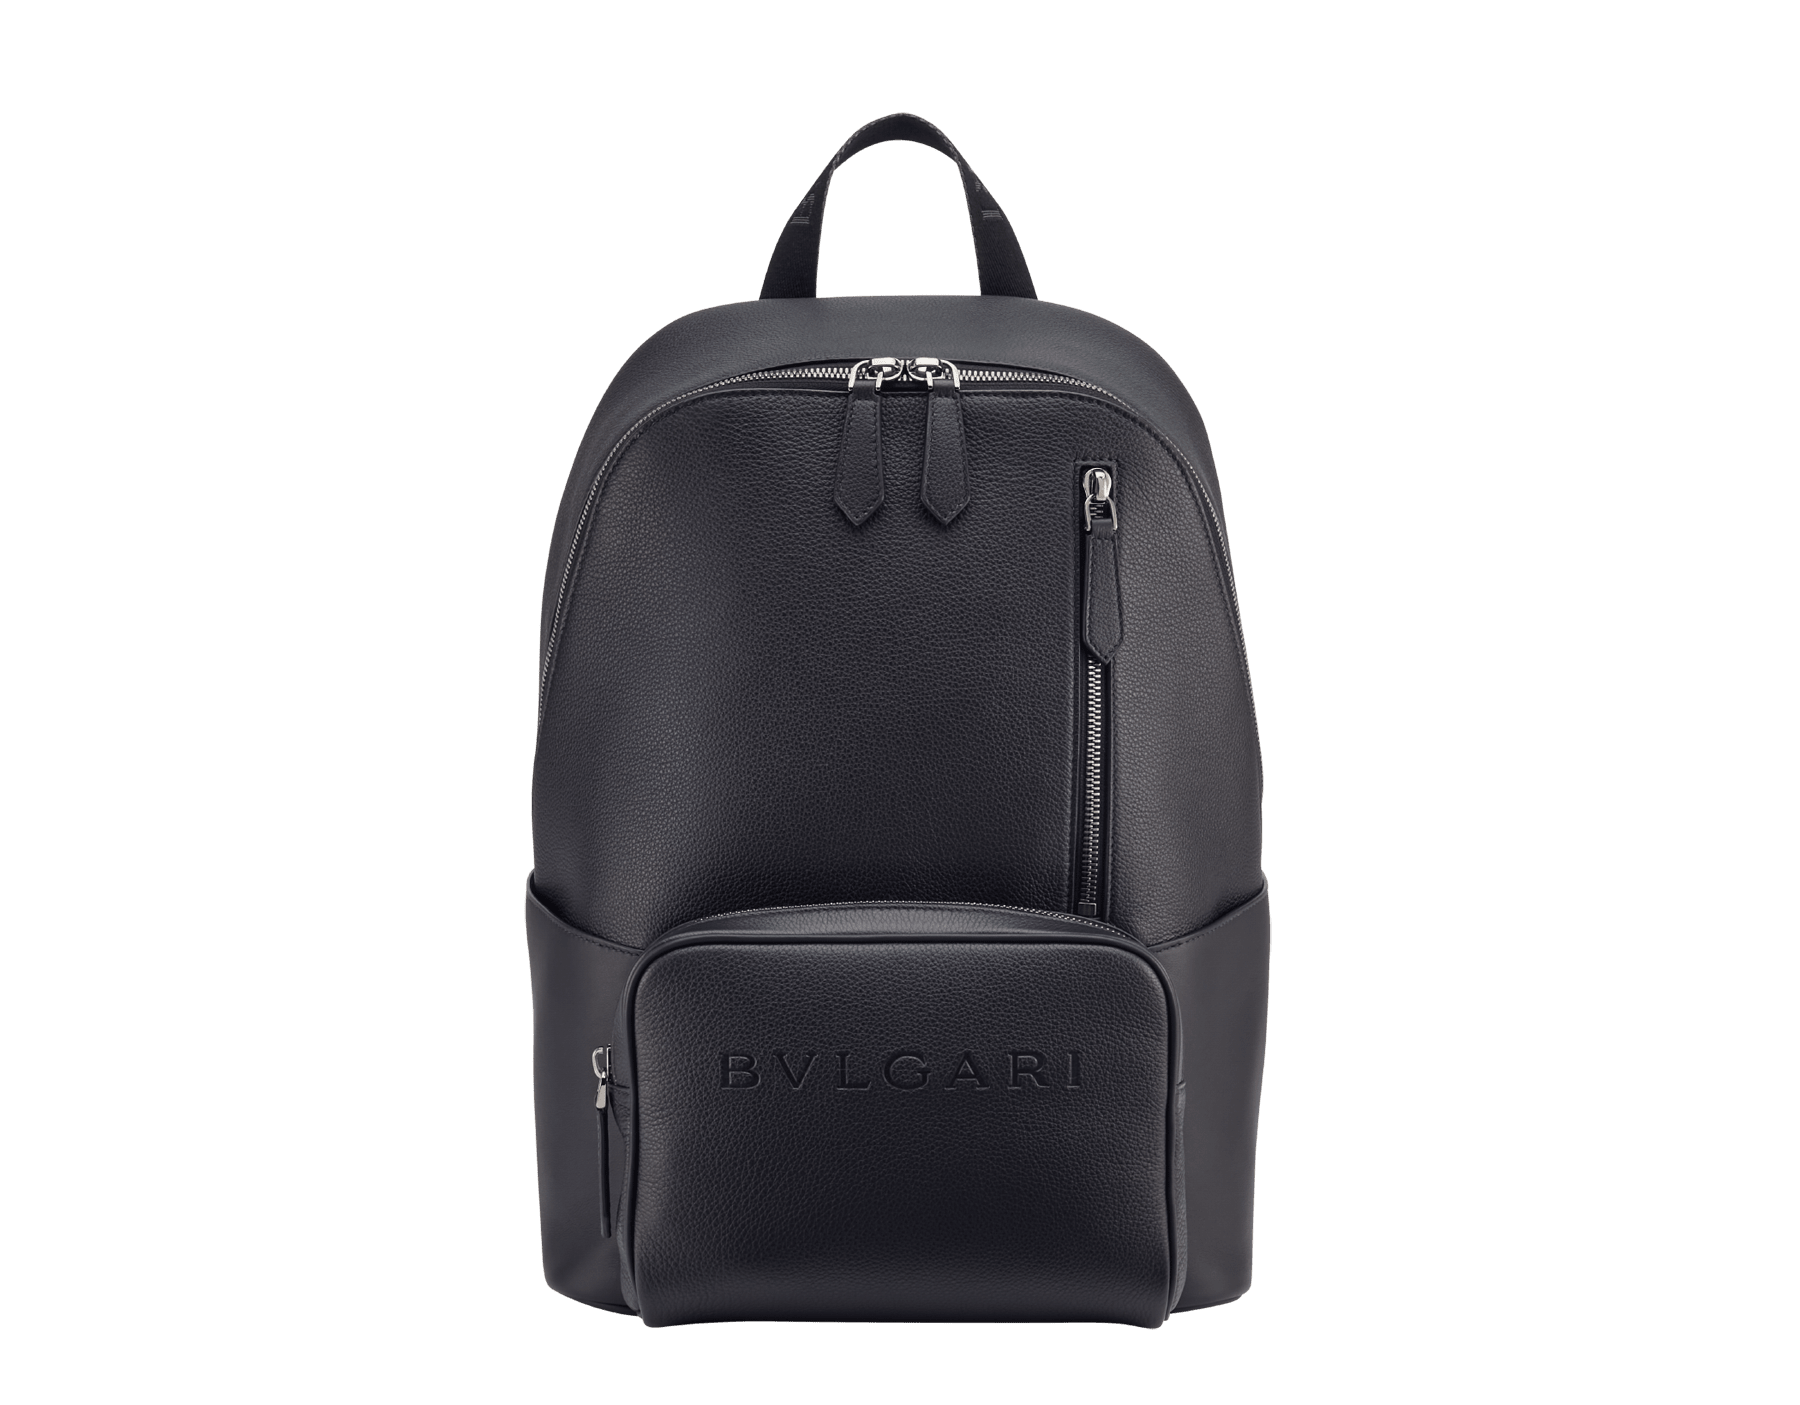 BULGARI Man large backpack in black smooth and grainy metal-free calf leather with Olympian sapphire blue regenerated nylon (ECONYL®) lining. Dark ruthenium-plated brass hardware, hot stamped BULGARI logo and zipped closure. BMA-1212-CL image 1